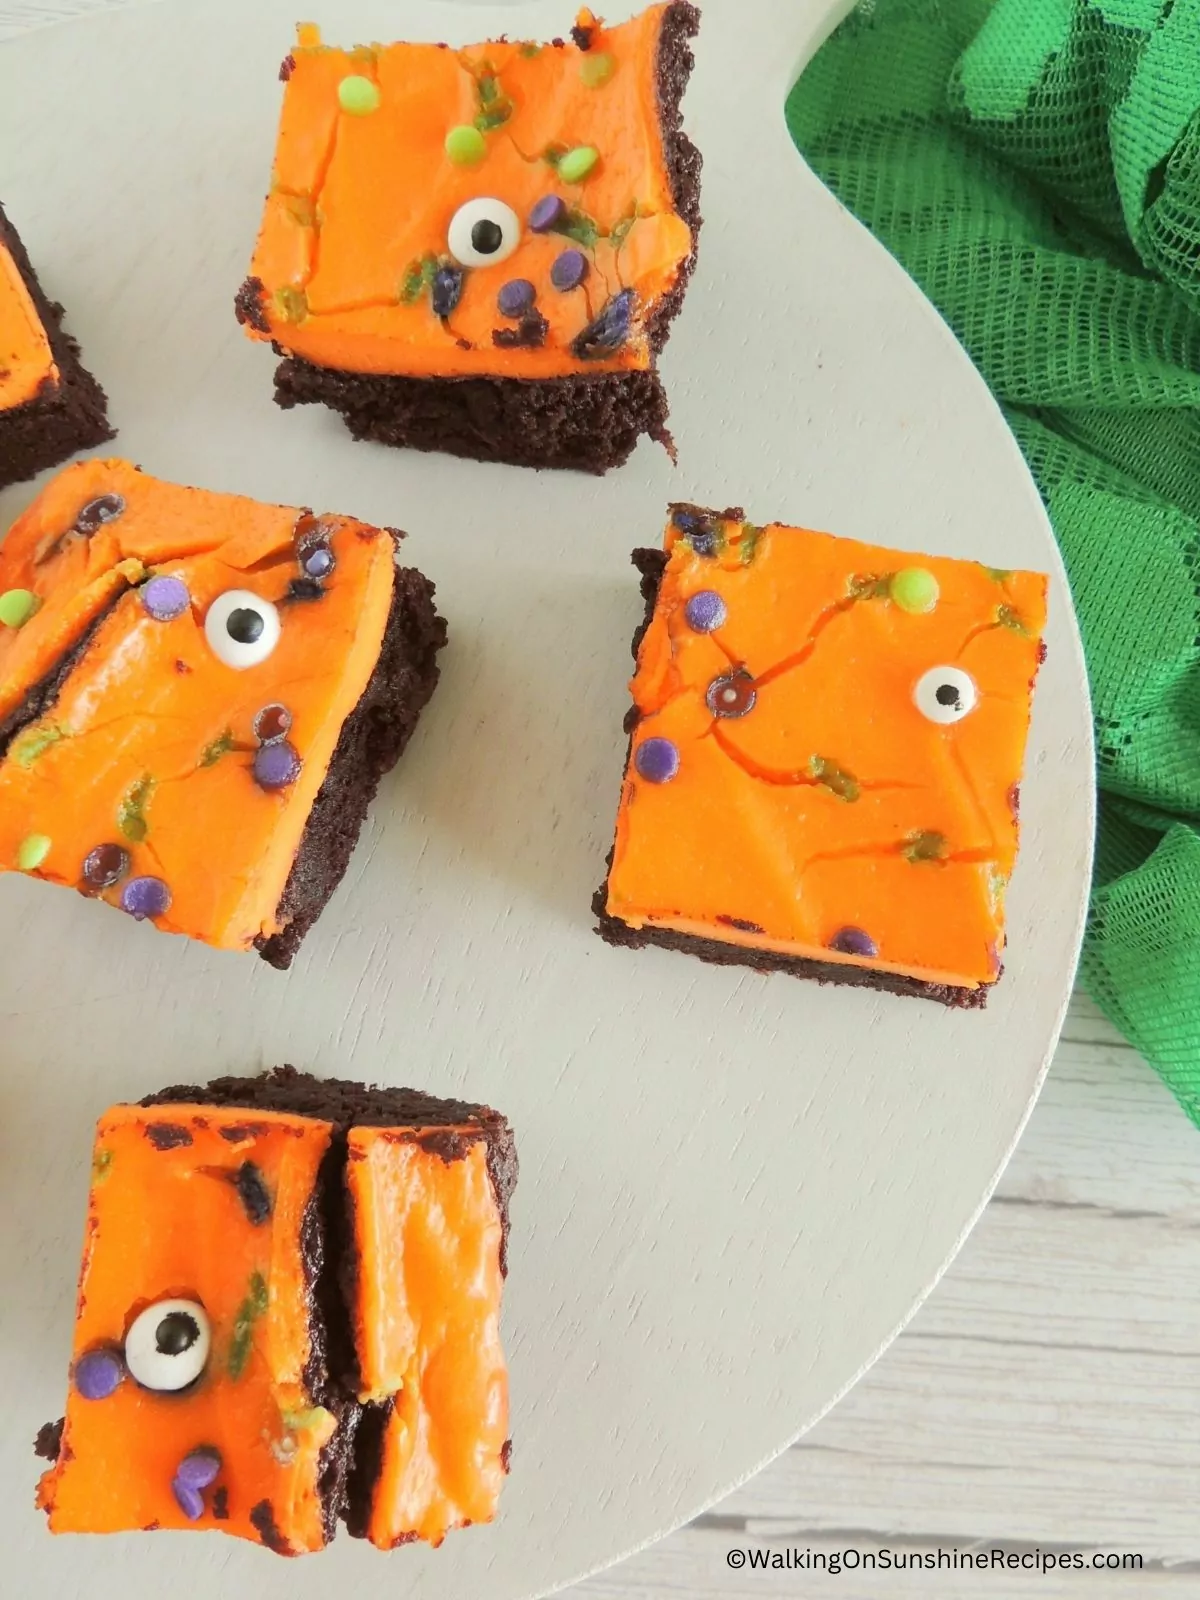 decorated brownies with orange frosting.